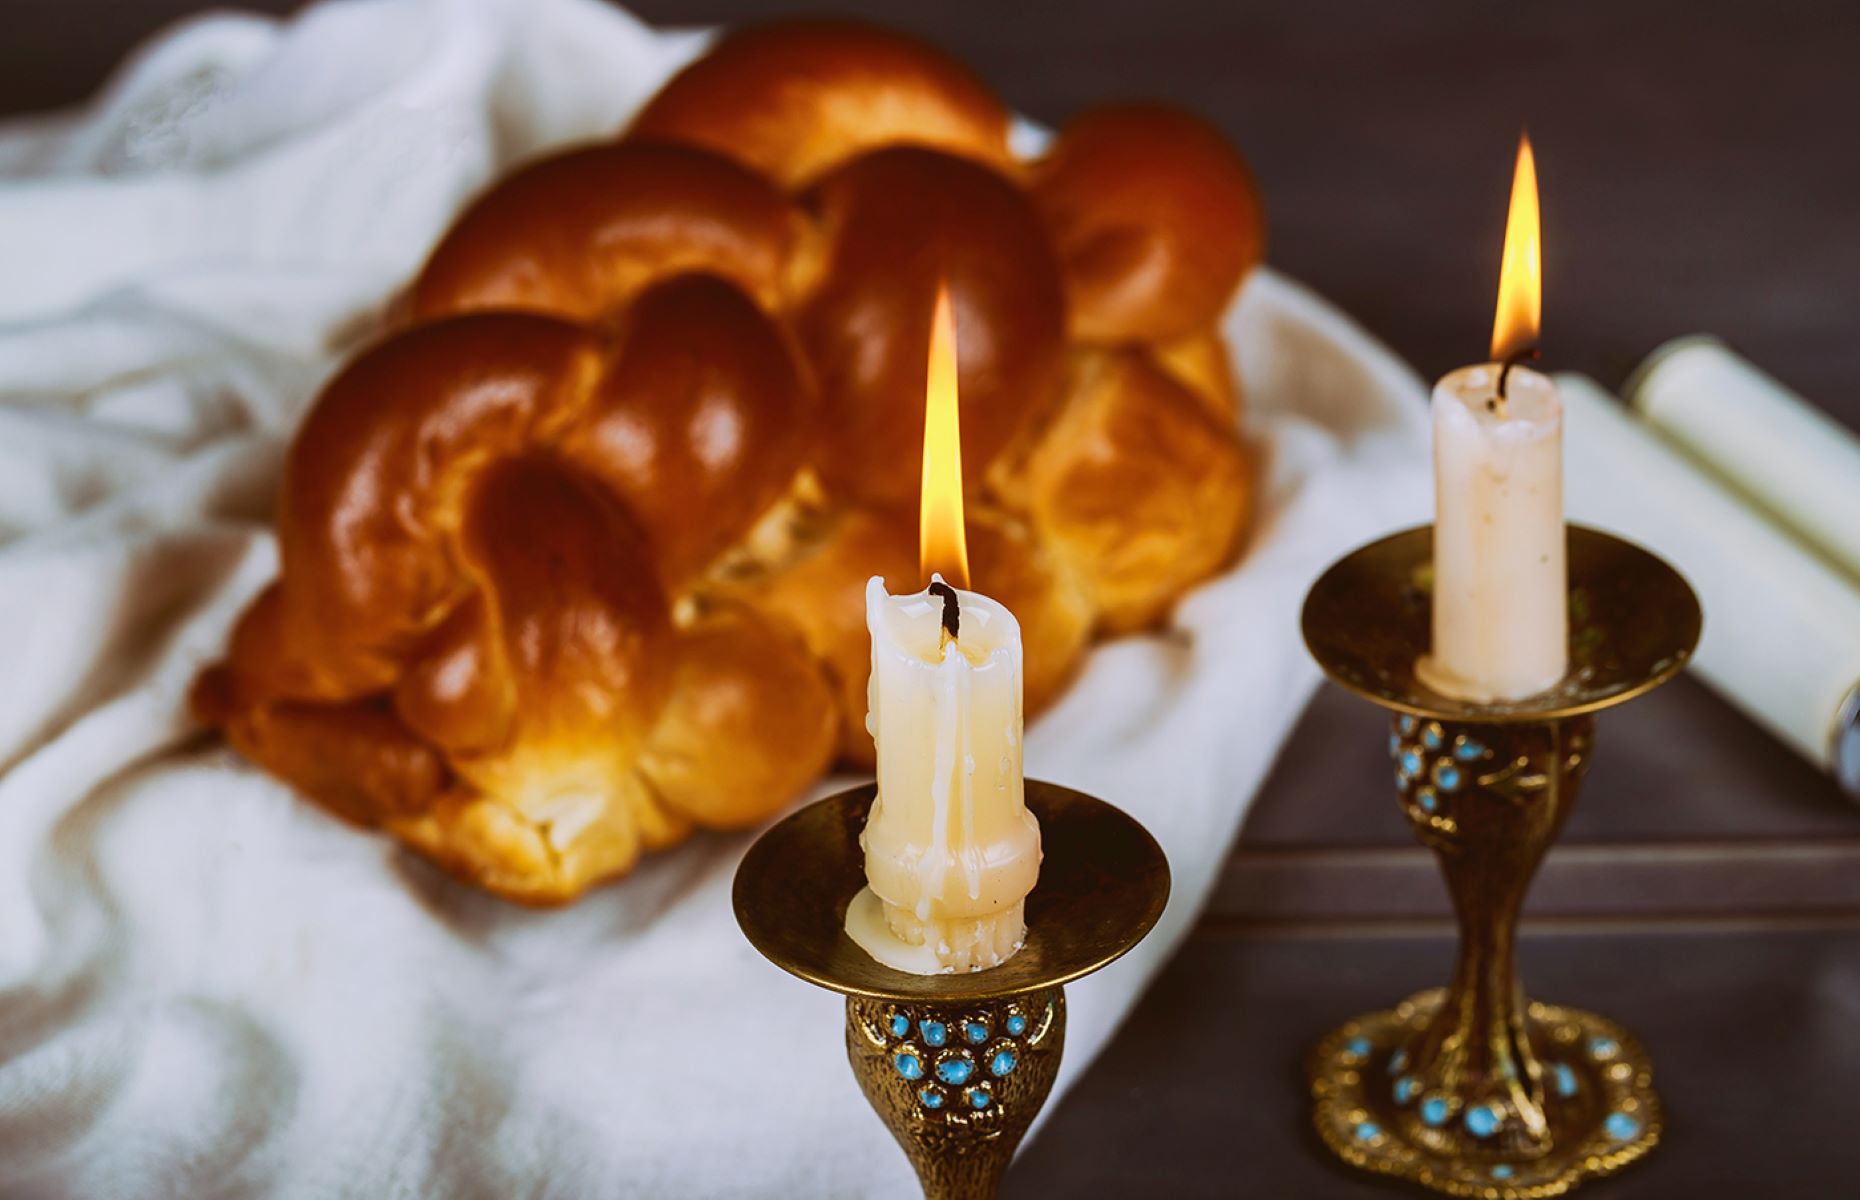 The Surprising Difference Between “Shabbat Shalom” And “Shalom”